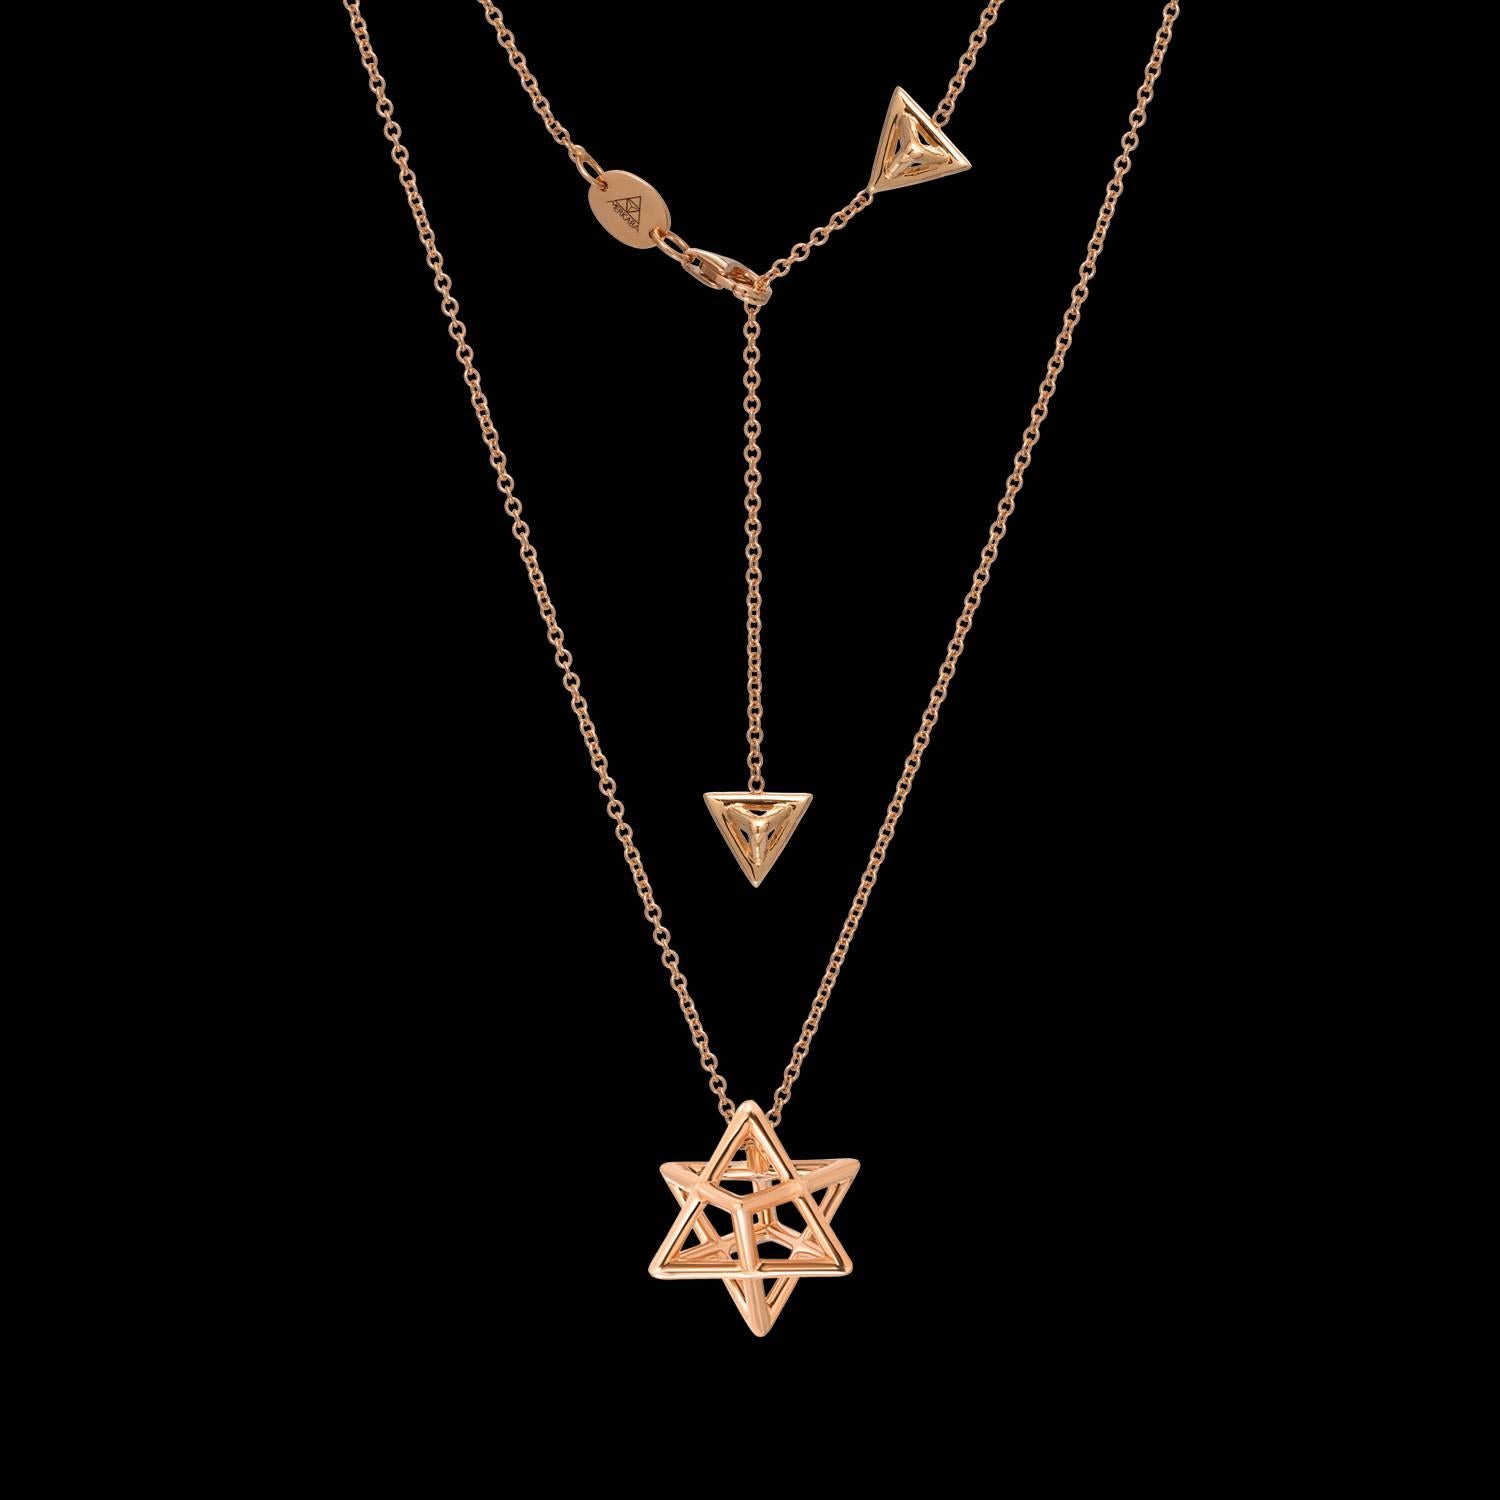 The Merkaba 18K rose gold necklace, is a heirloom-quality, sacred geometric jewelry piece highlighting superb attention to detail and extraordinary polish, symmetry and equilibrium. It suspends elegantly at the chest, measuring 0.68